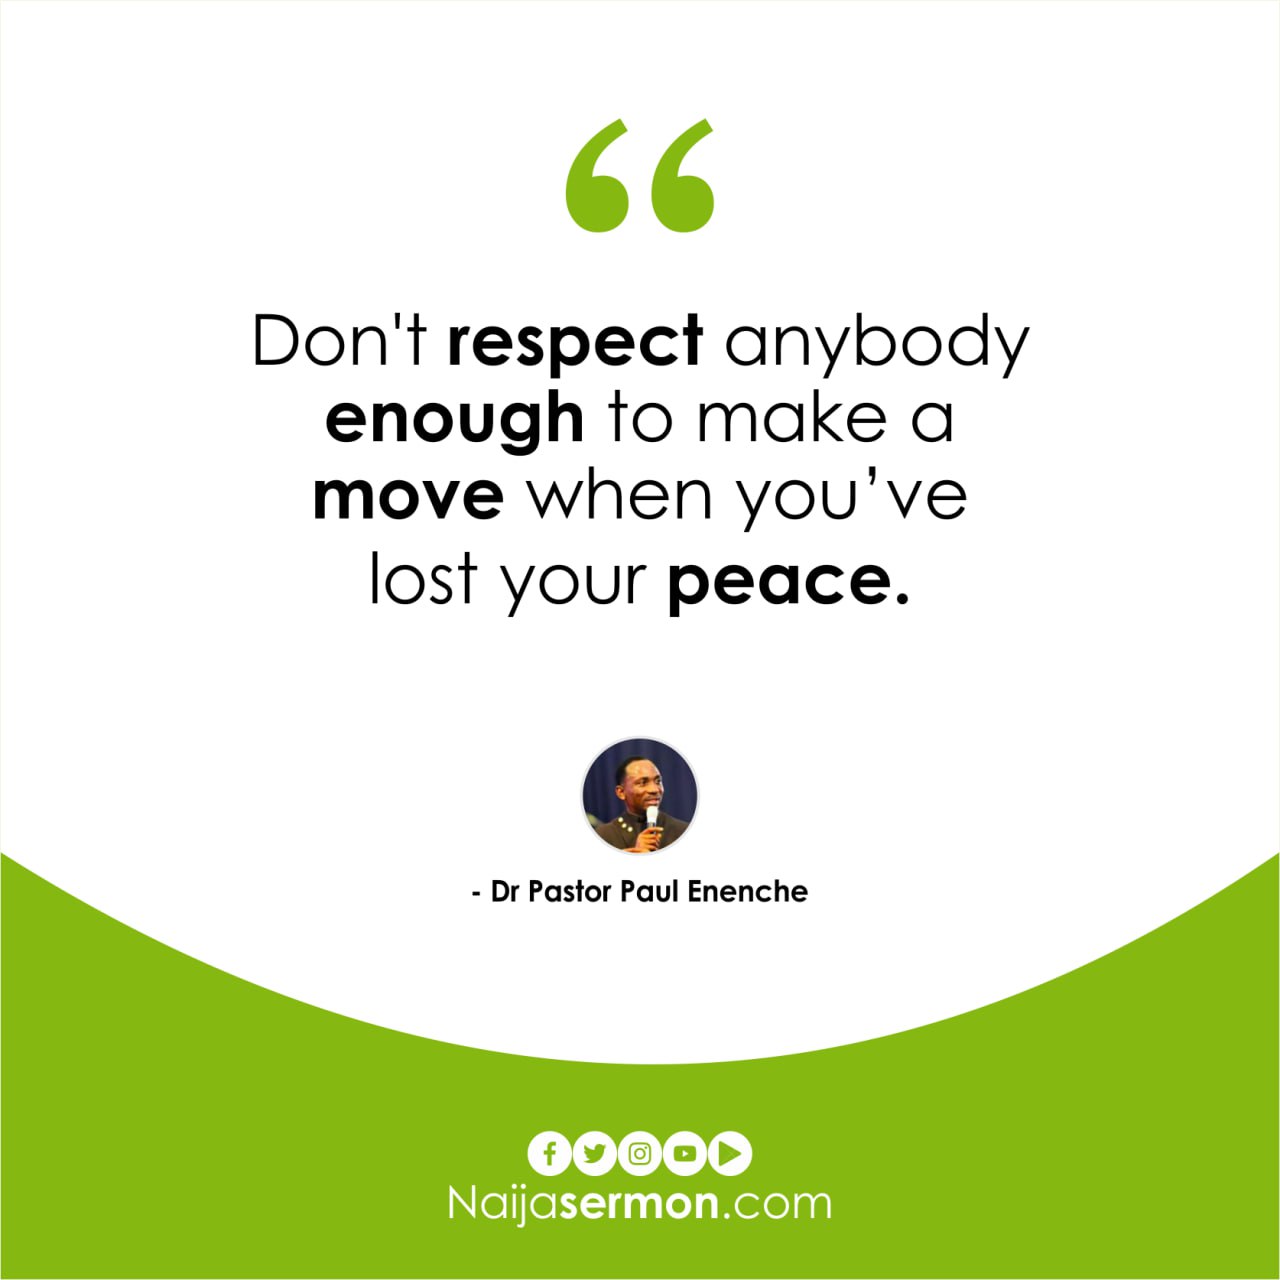 QUOTE OF THE DAY BY DR PASTOR PAUL ENENCHE 14